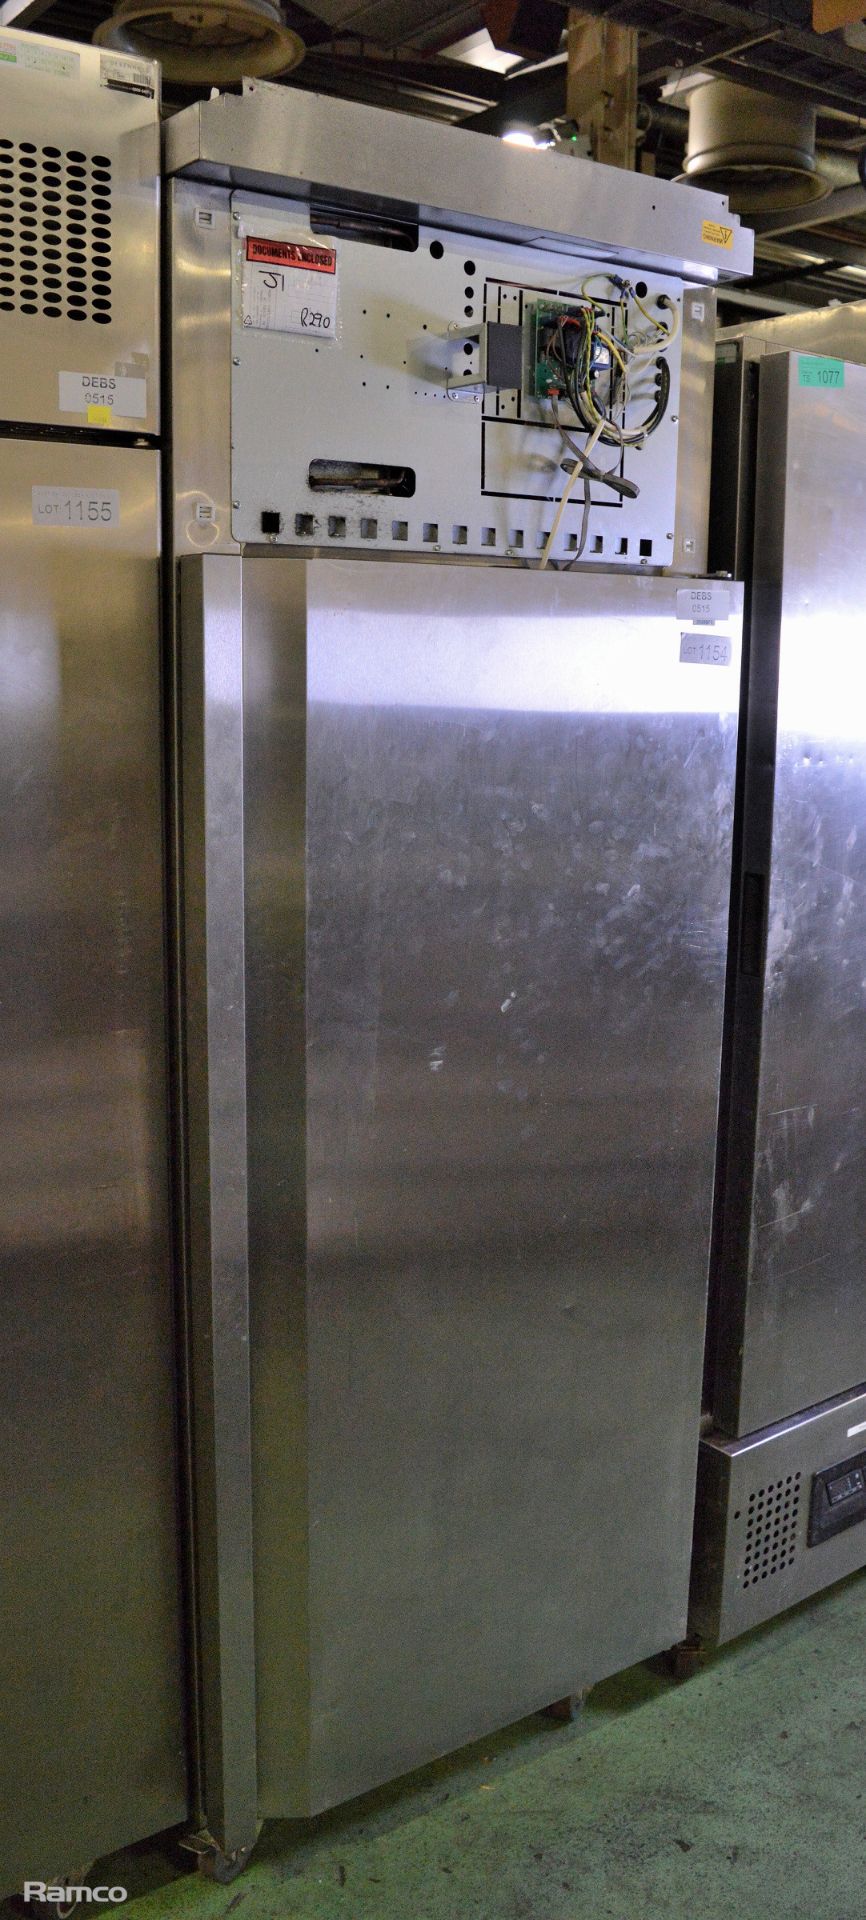 Williams LJ1SA R290 R1 Upright Freezer - L740 x W820 x H1960mm (front panel not fitted) - Image 2 of 5